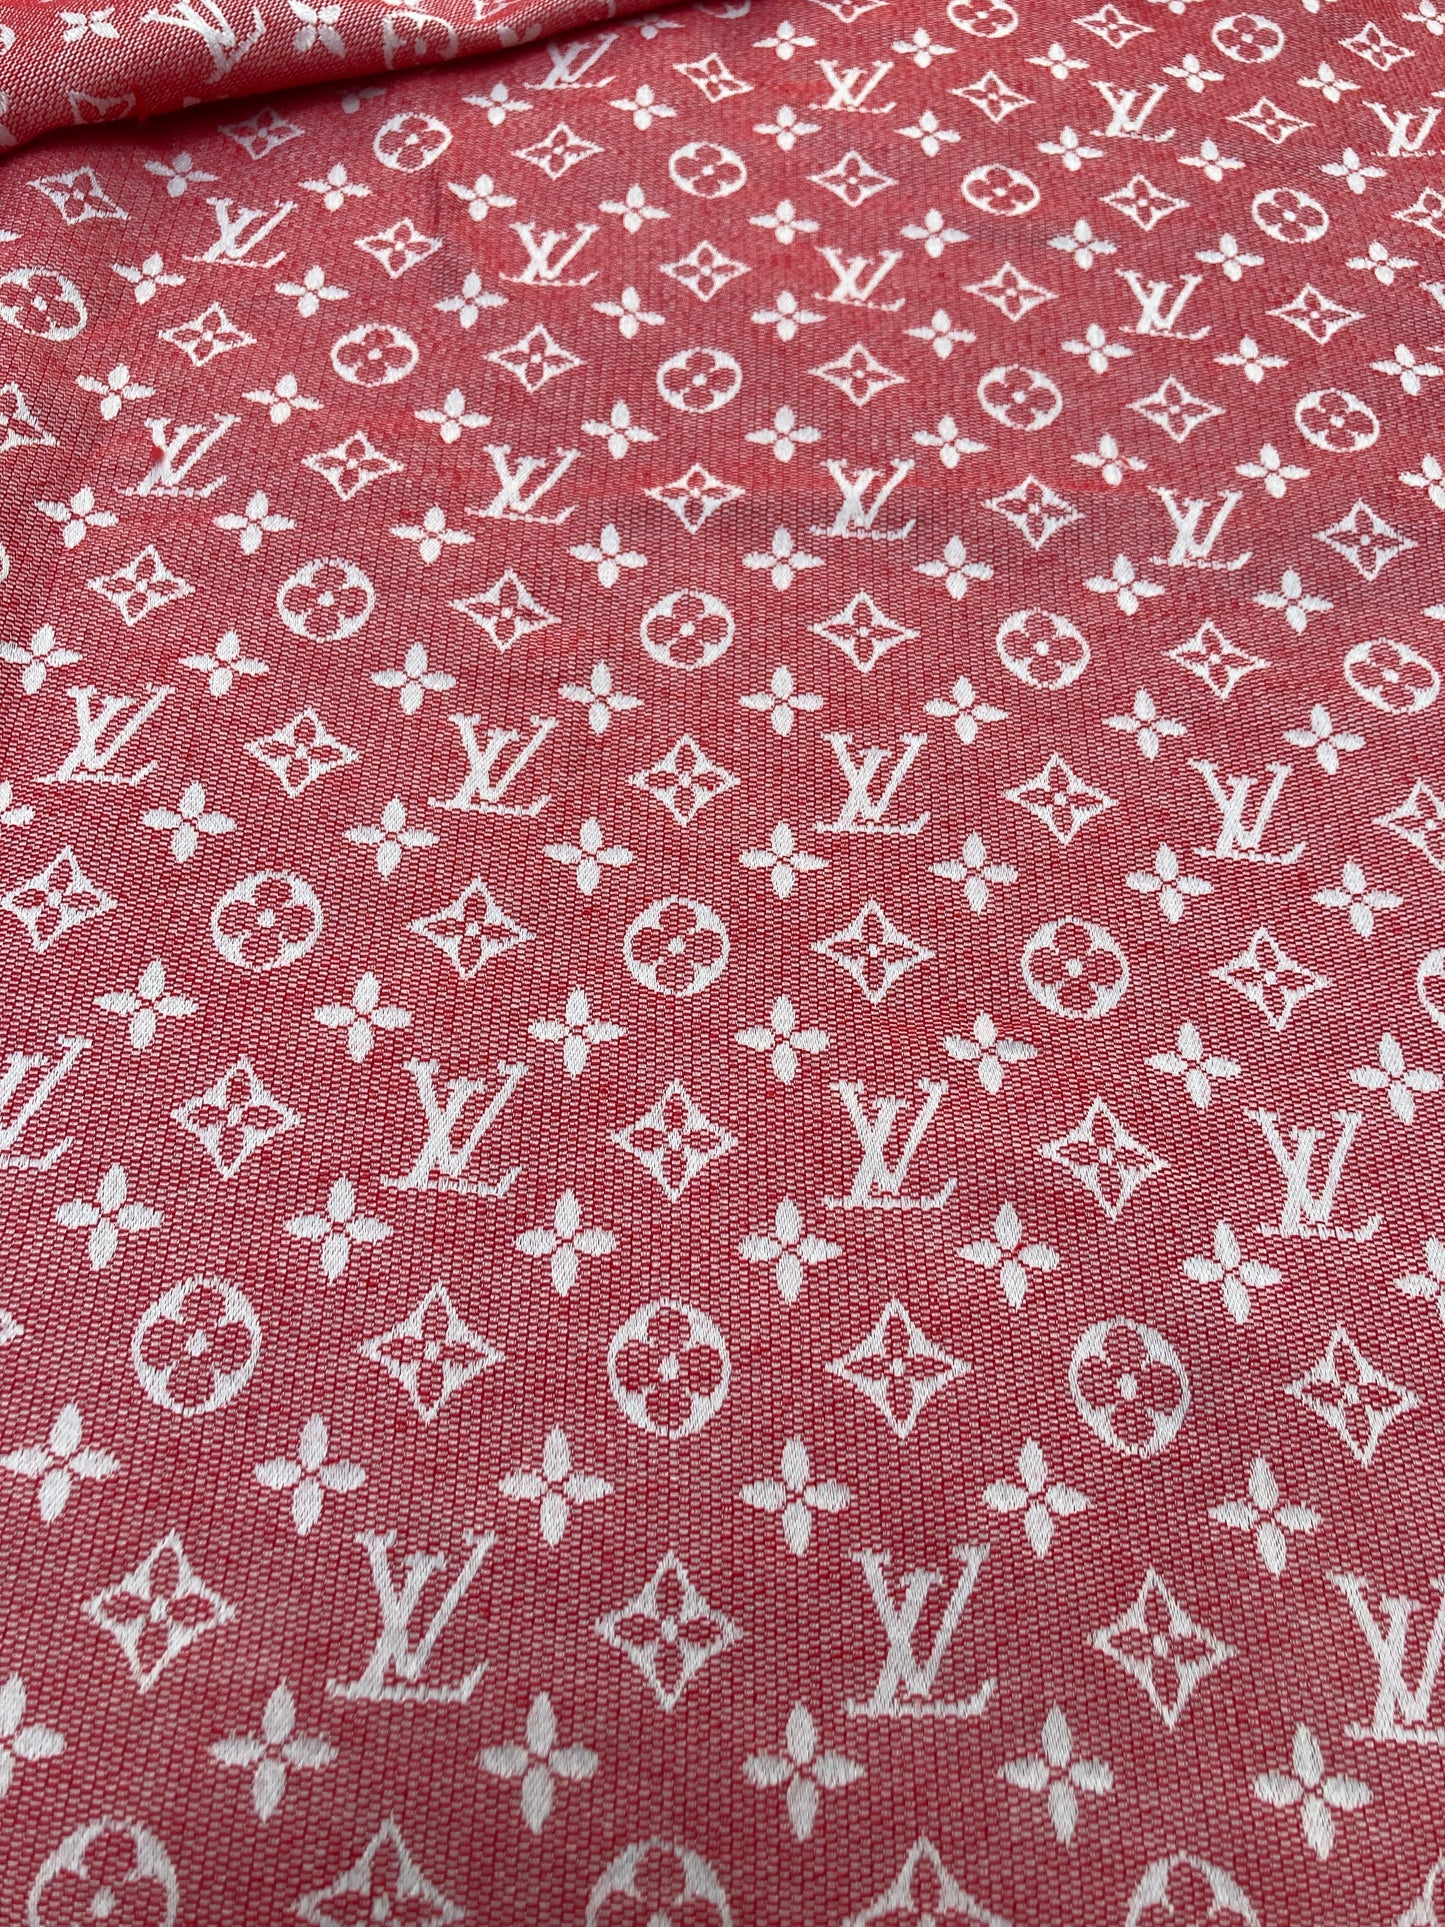 Red Cotton Jacquard LV Crafts Fabric for Handmade